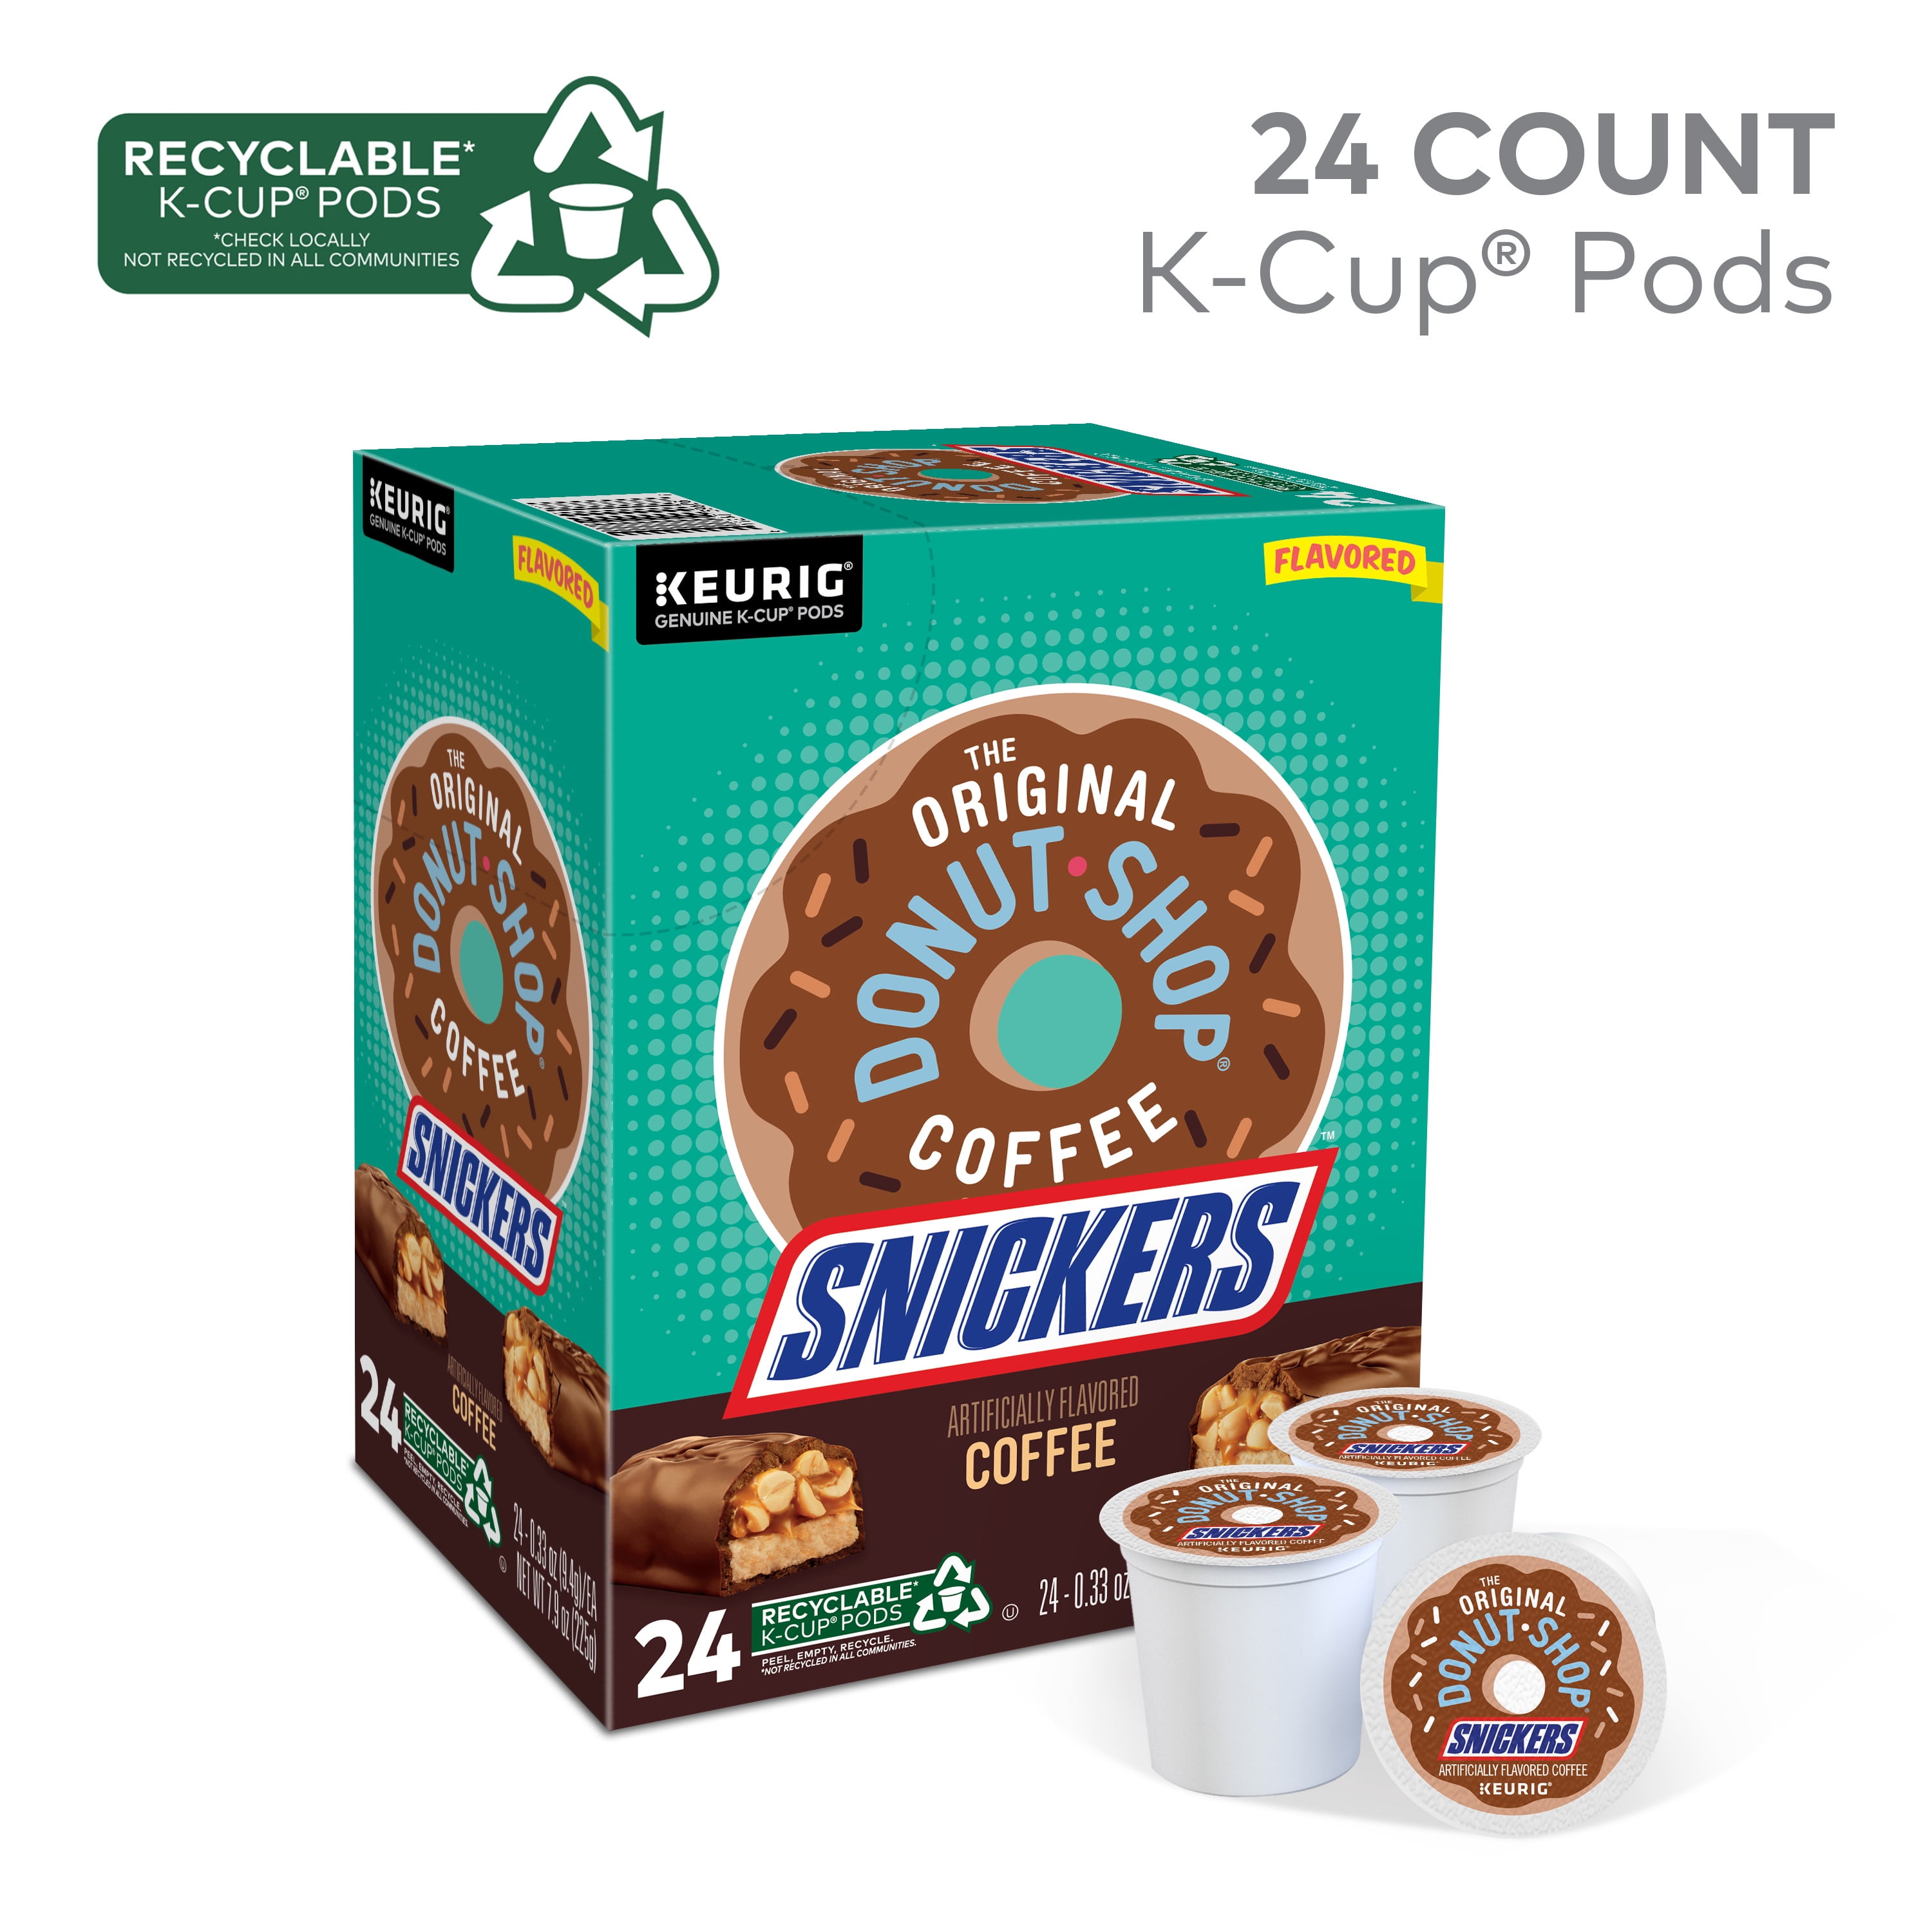 The Original Donut Shop, Snickers Flavored K-Cup Coffee Pods, 24 Count 